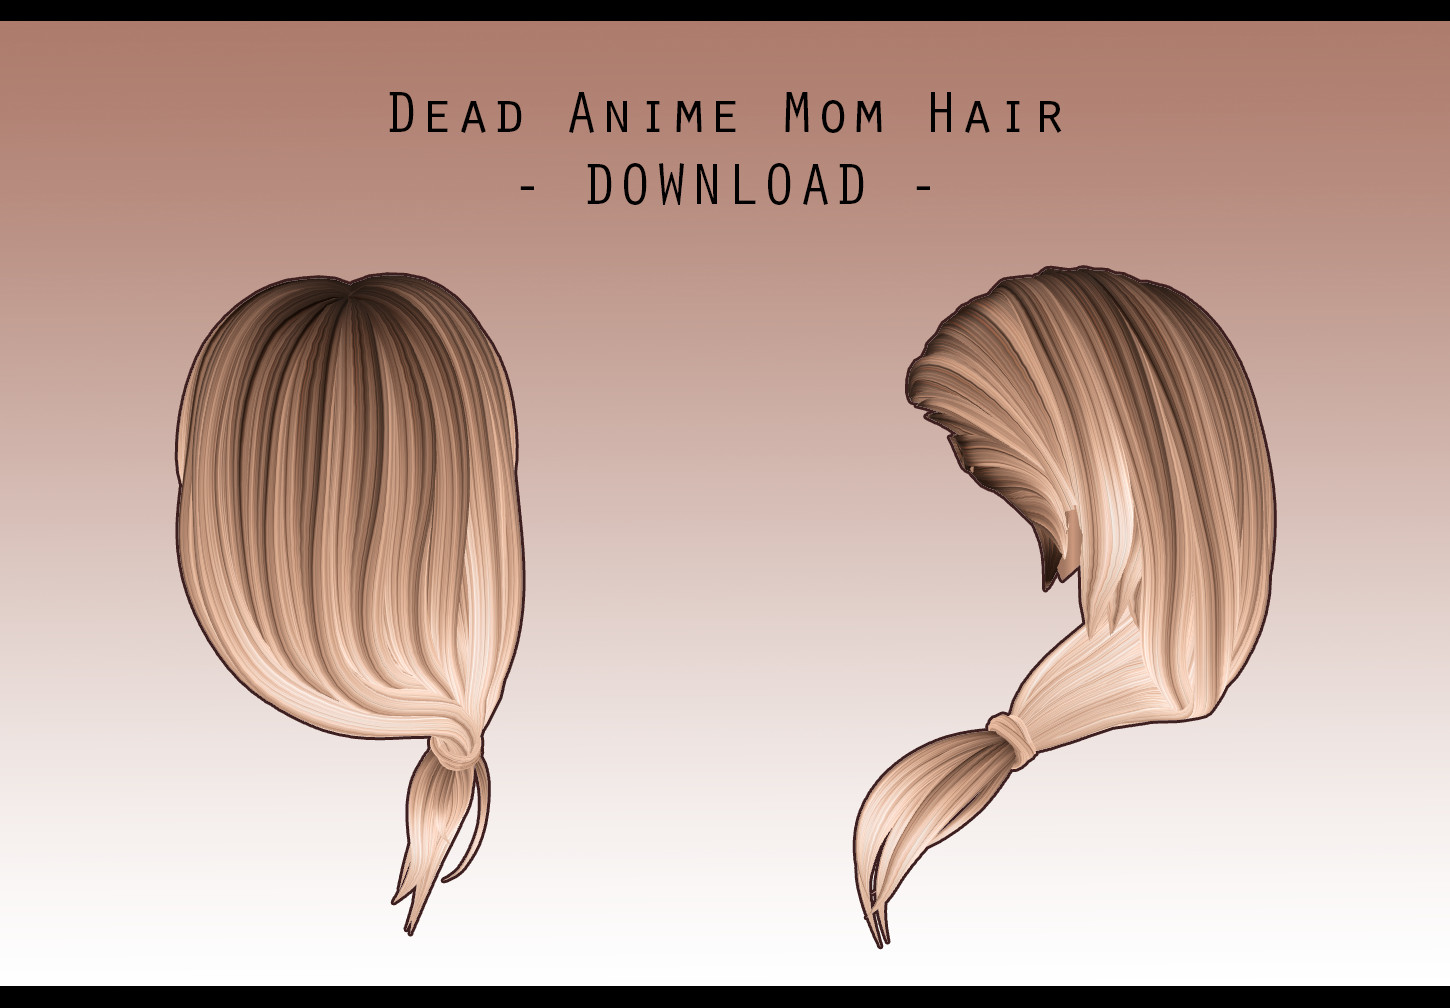 Anime Dead Mom Hairstyle
 Dead Anime Mom back Hair [ DOWNLOAD ] by avant garde on